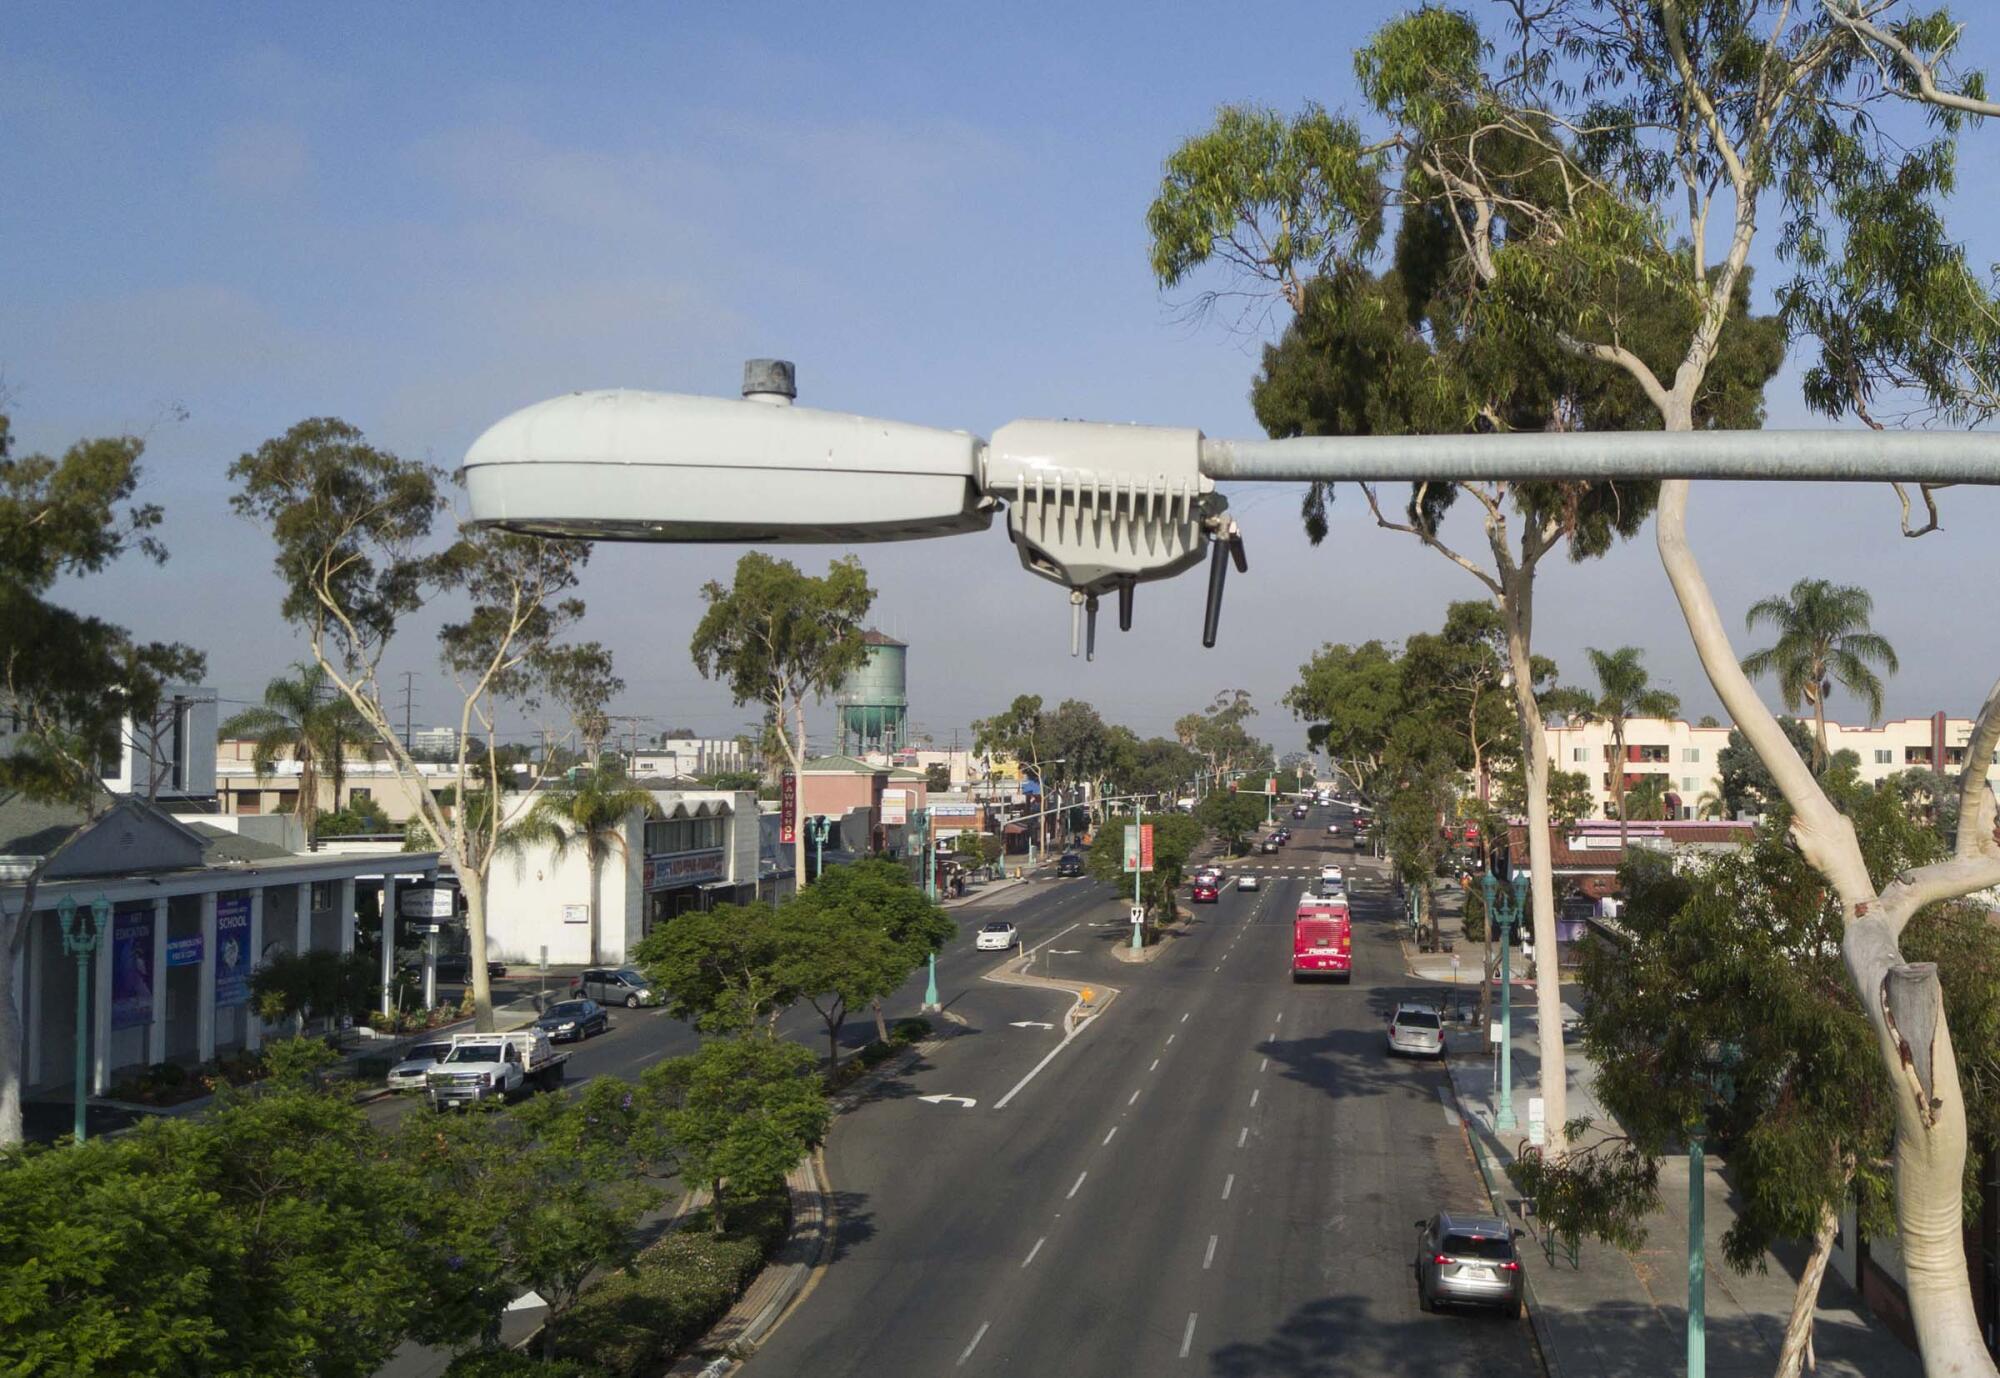 The City of San Diego has already installed thousands of "Smart Street Lamps" that include an array of sensors including video and audio that is used by law enforcement and other city entities. On Friday August 2, 2019, these camera arrays, mounted on the "cobra head" style street lamps were photographed in North Park at the corner of Illinois and El Cajon Blvd.